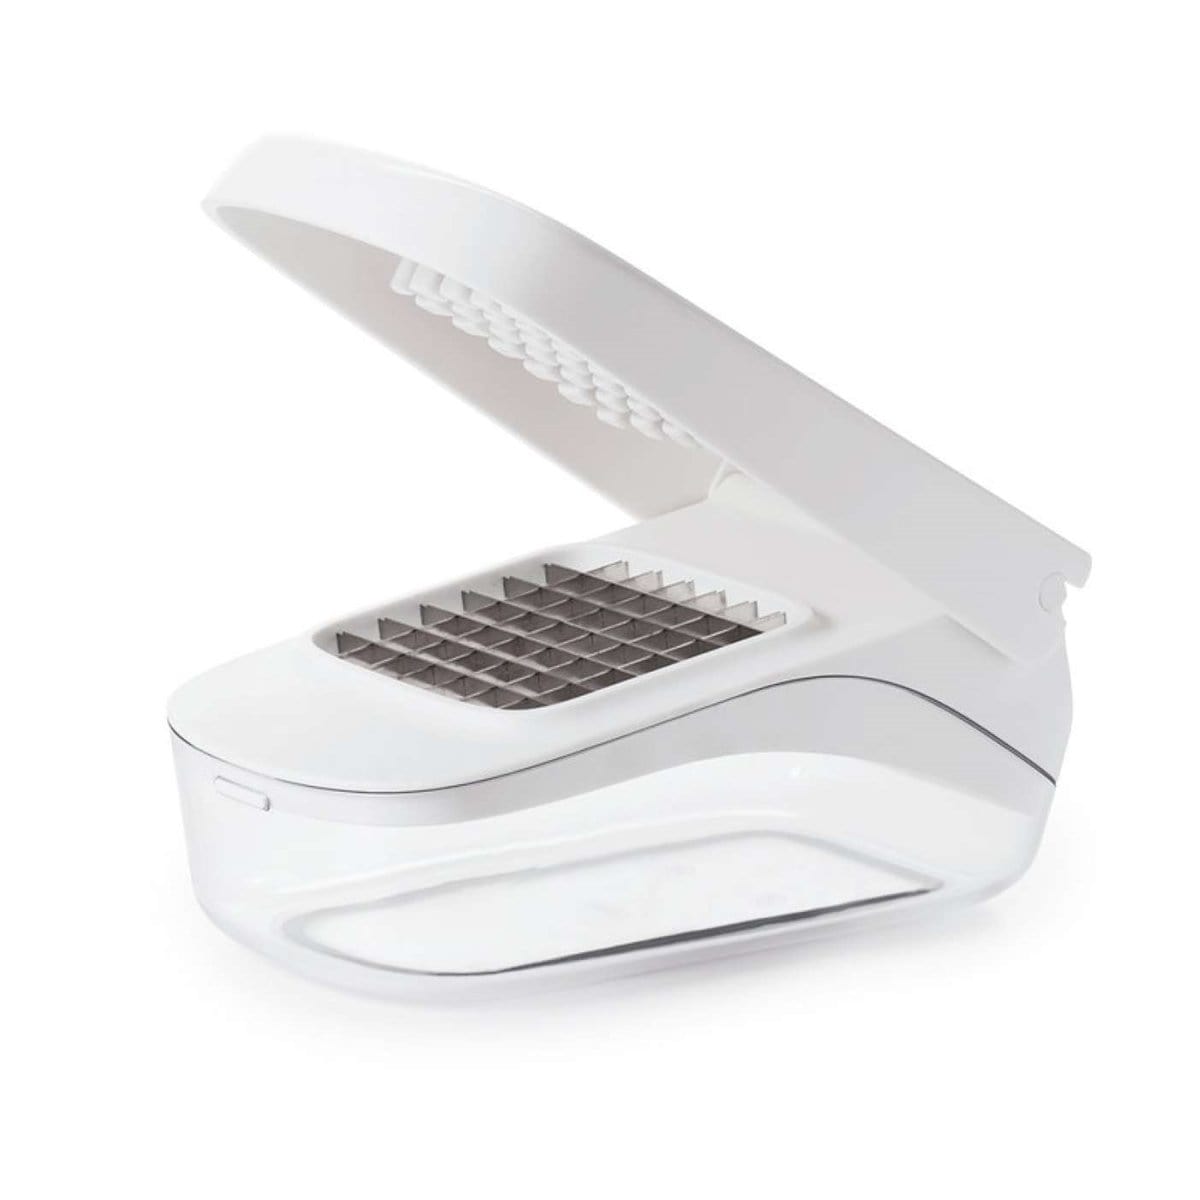 OXO Good Grips Salad Chopper with Bowl